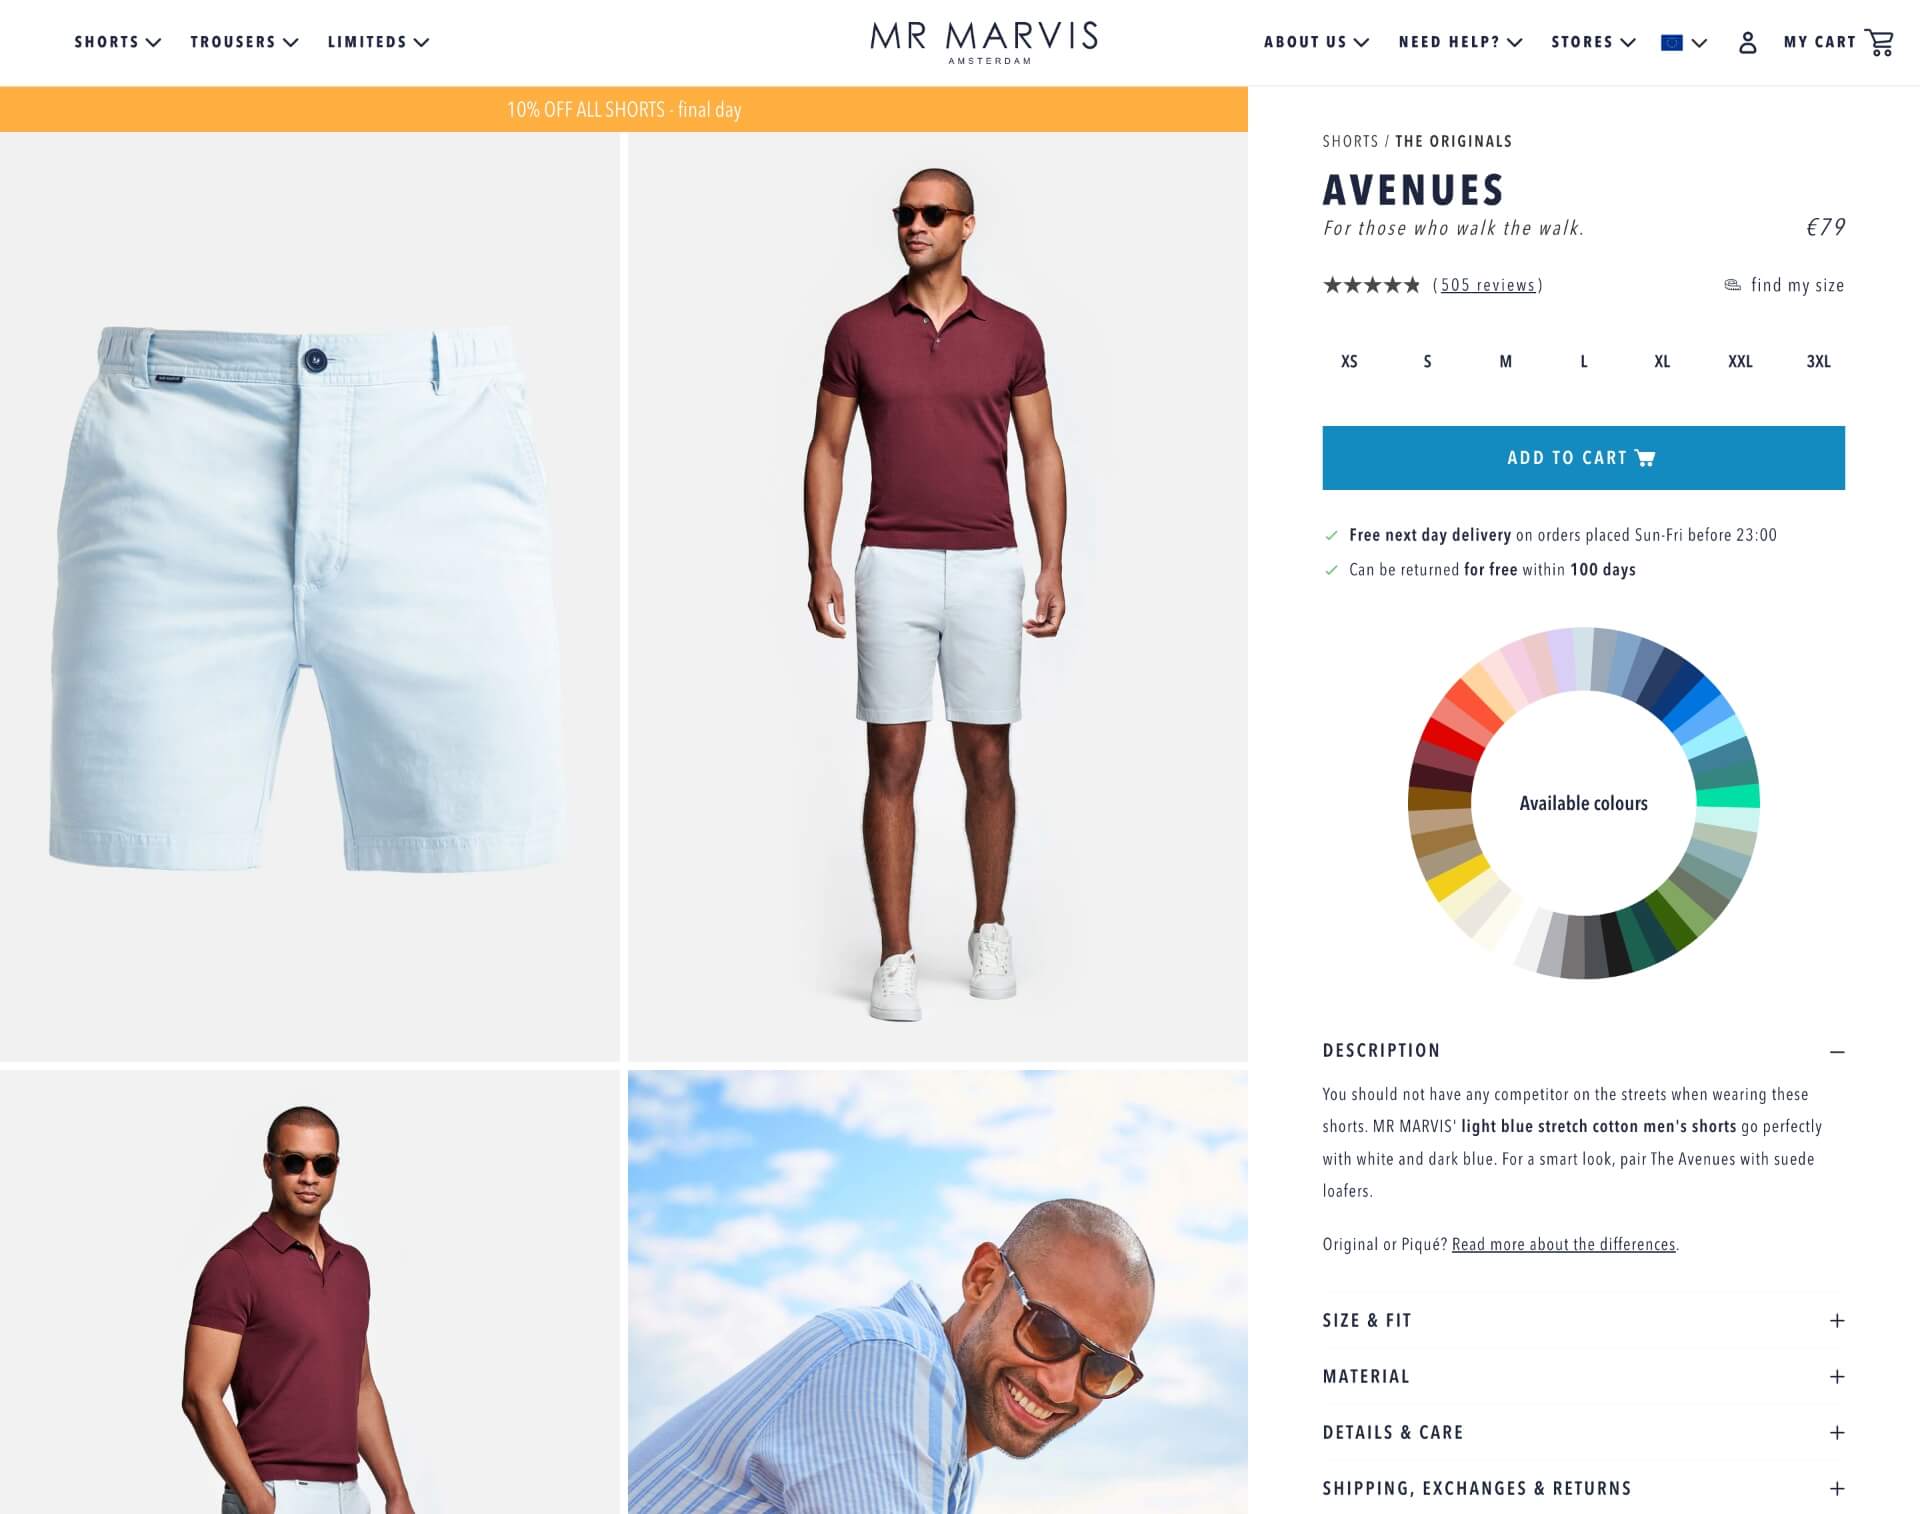 MR MARVIS webshop on Shopify Plus